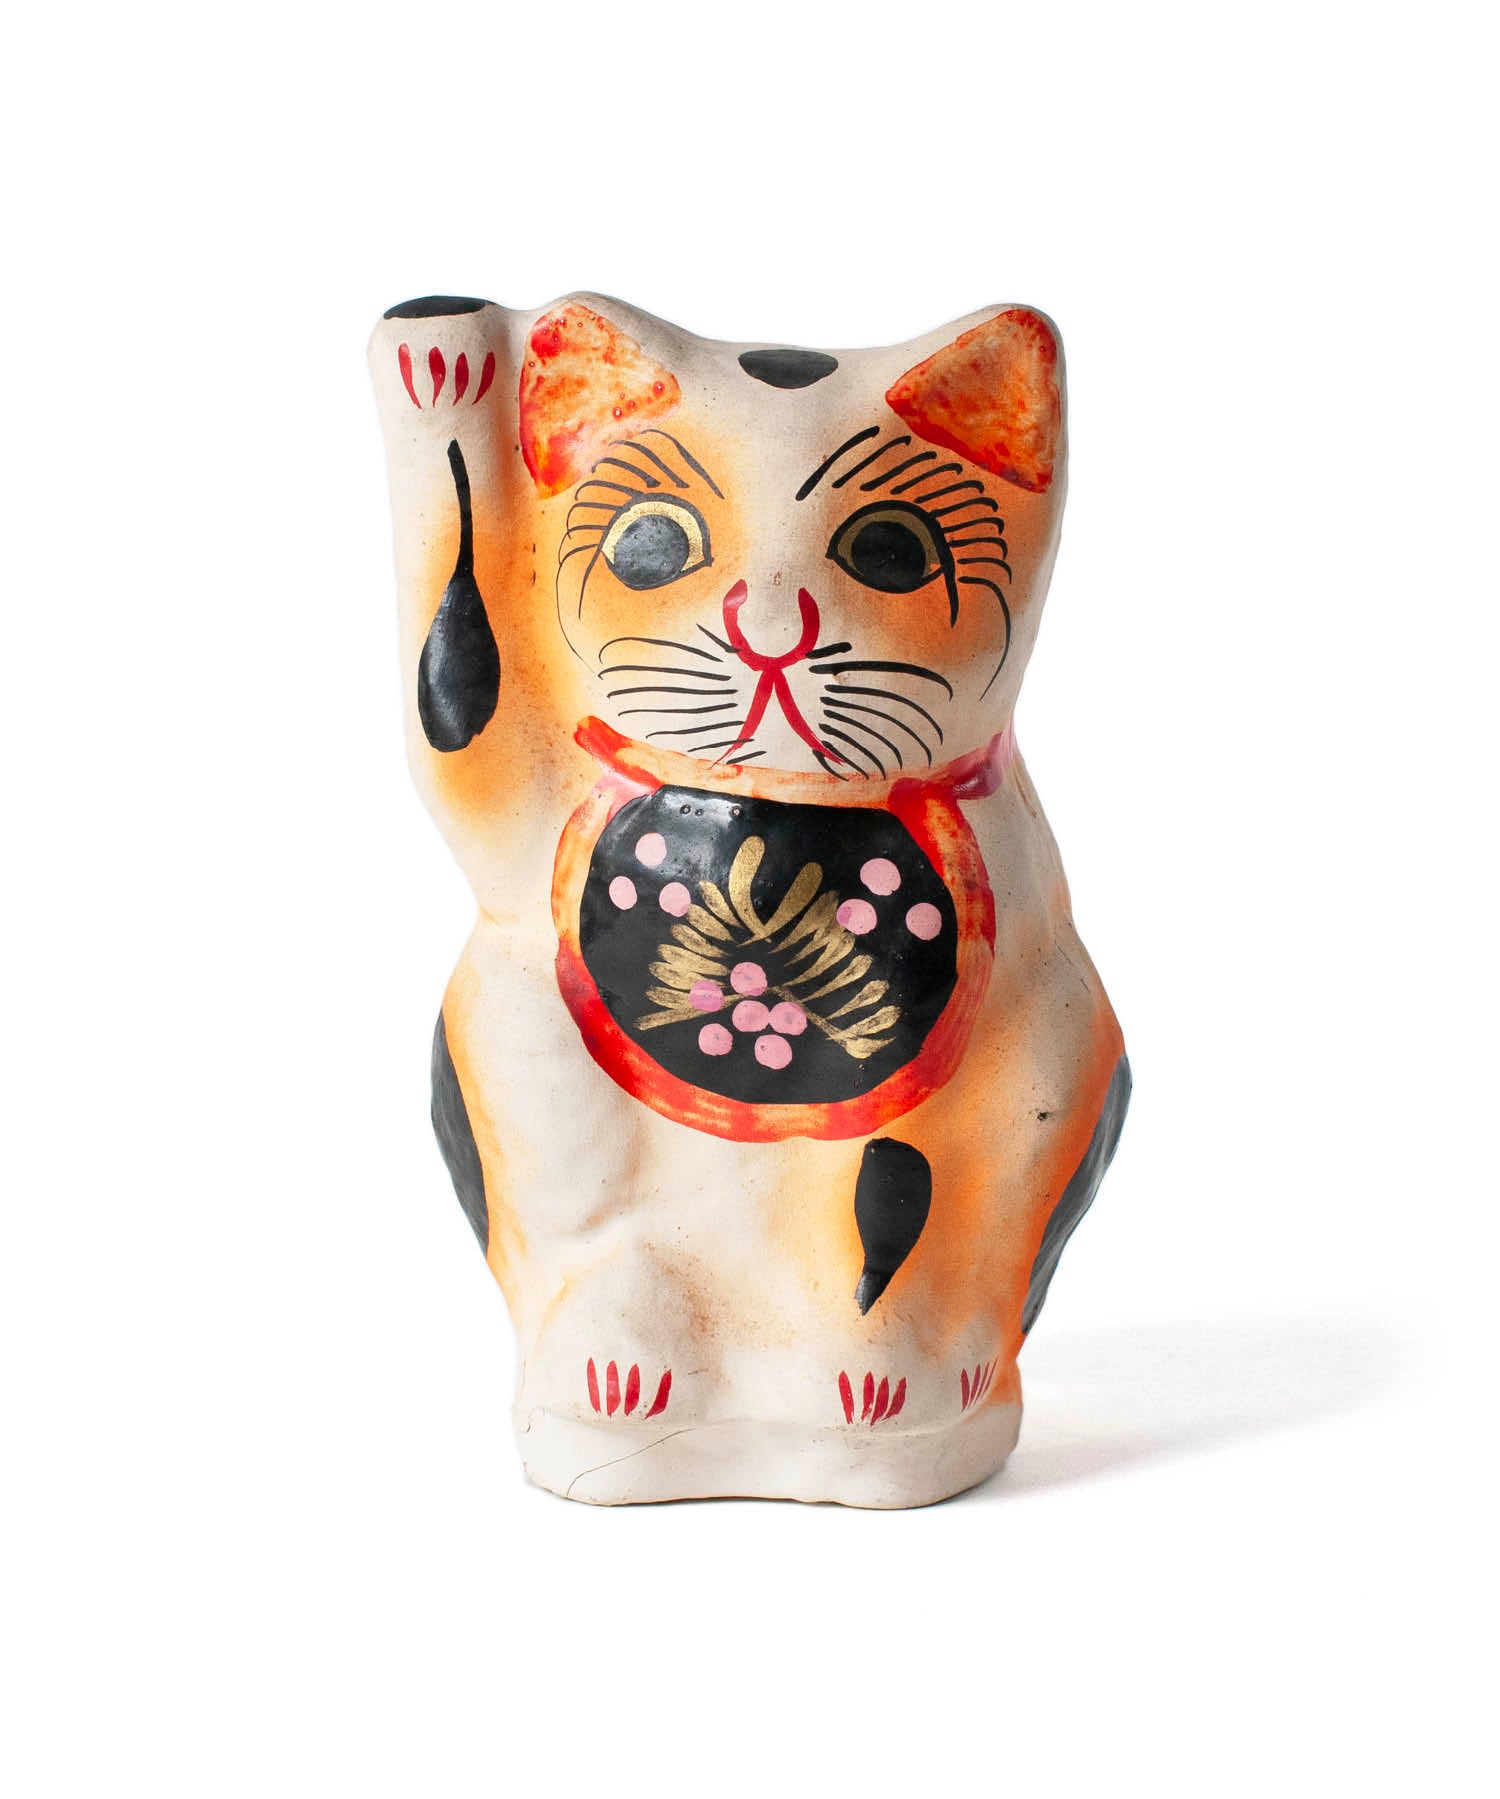 Vintage Object : 豊岡招き猫 | LIKE THIS SHOP